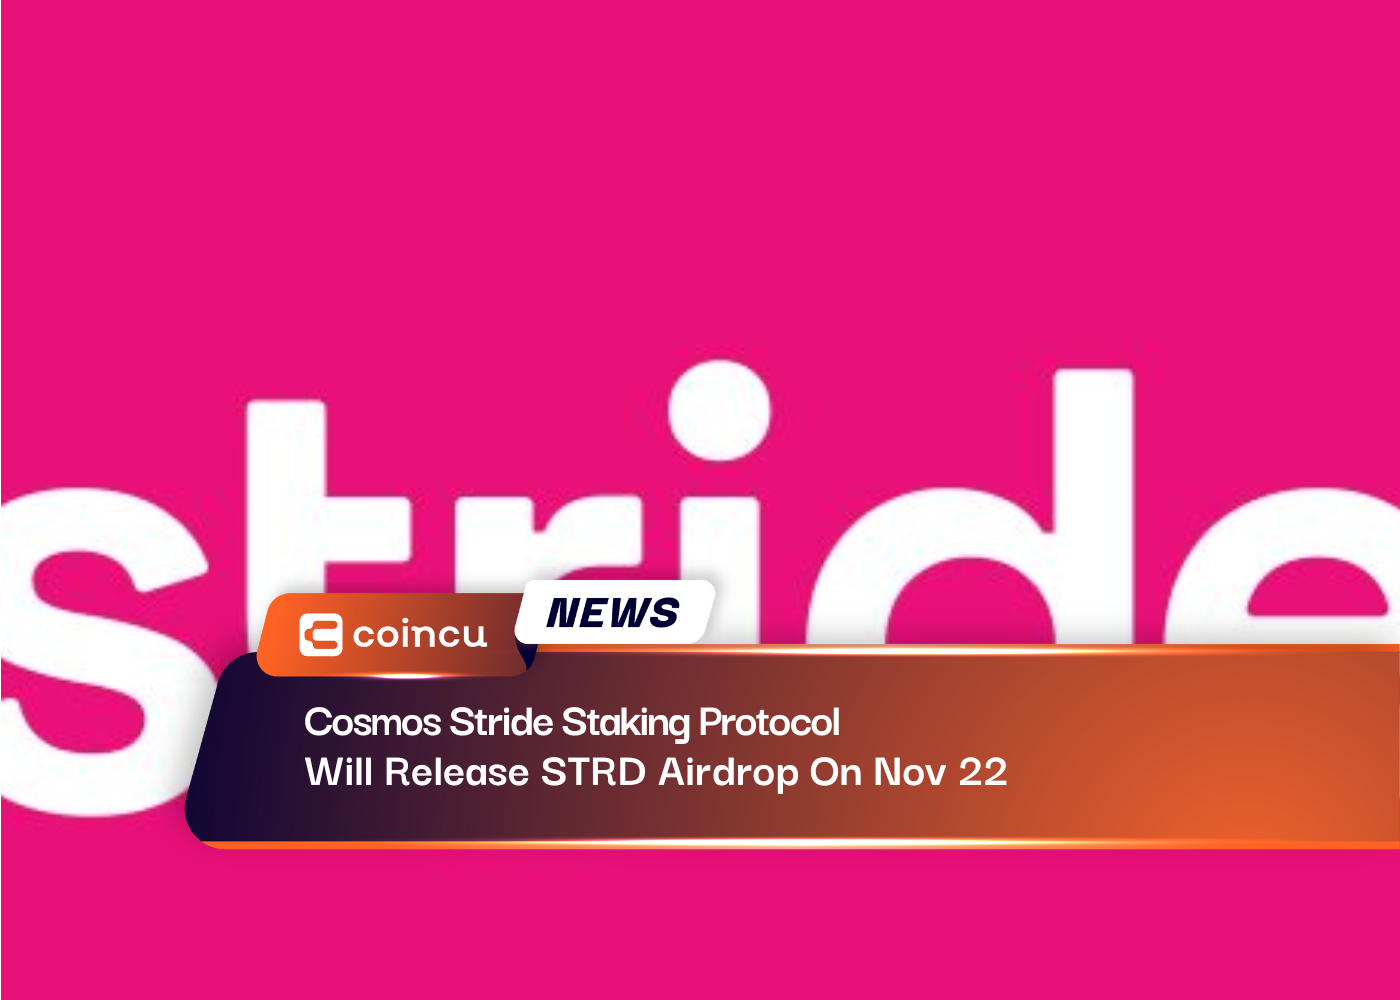 Cosmos Stride Staking Protocol Will Release STRD Airdrop On Nov 22